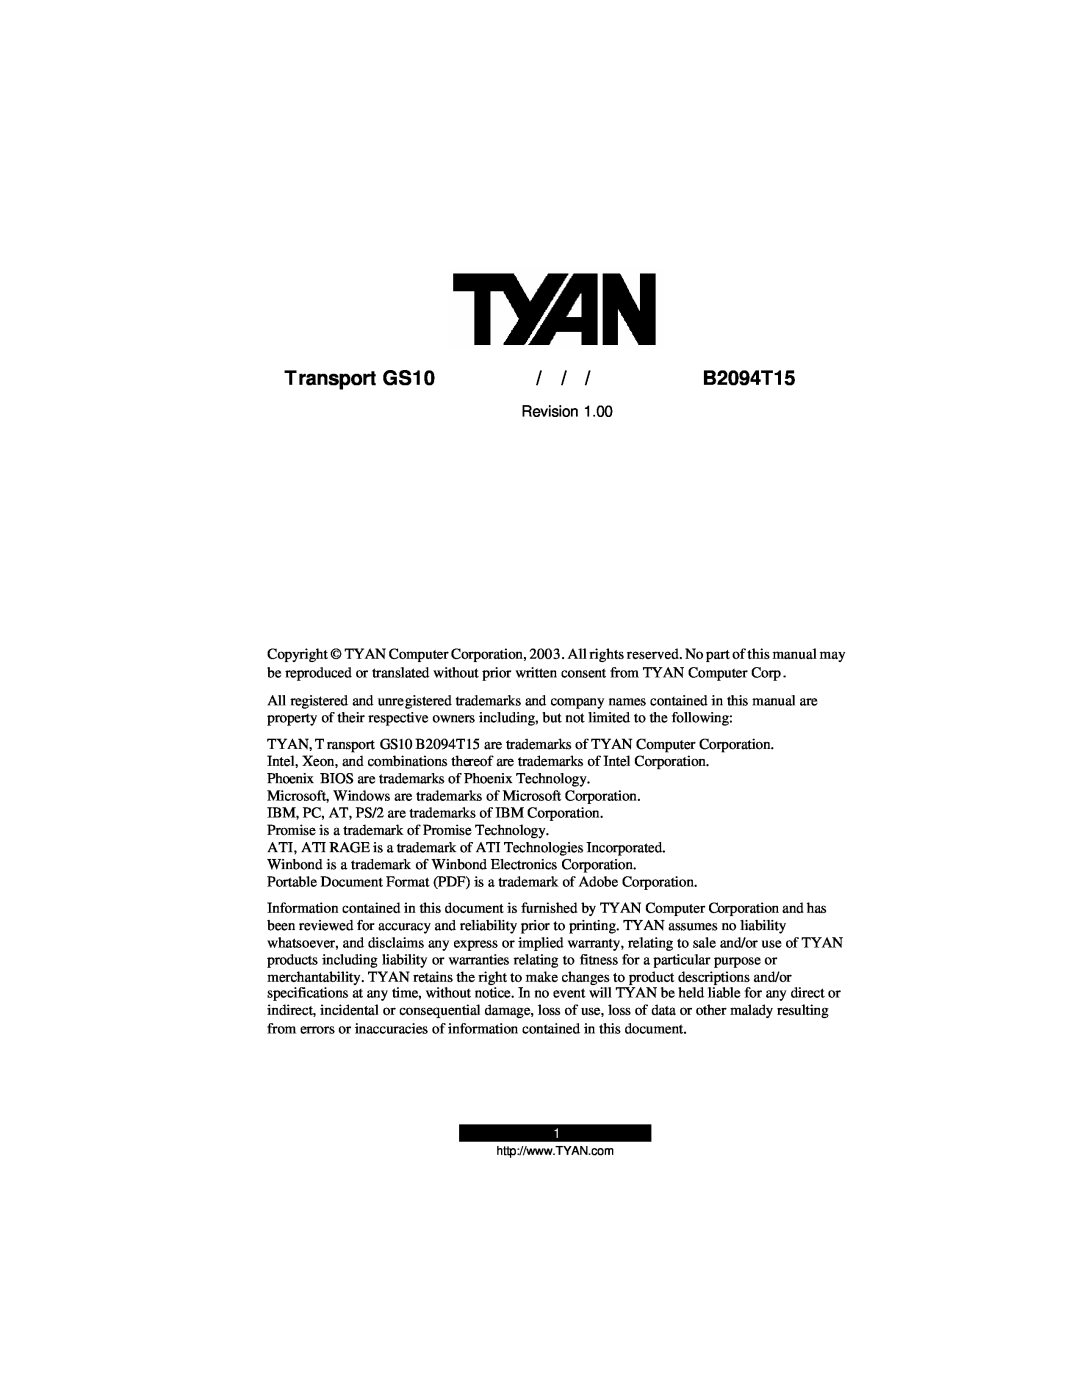 Tyan Computer B2094T15 warranty Revision, Transport GS10 